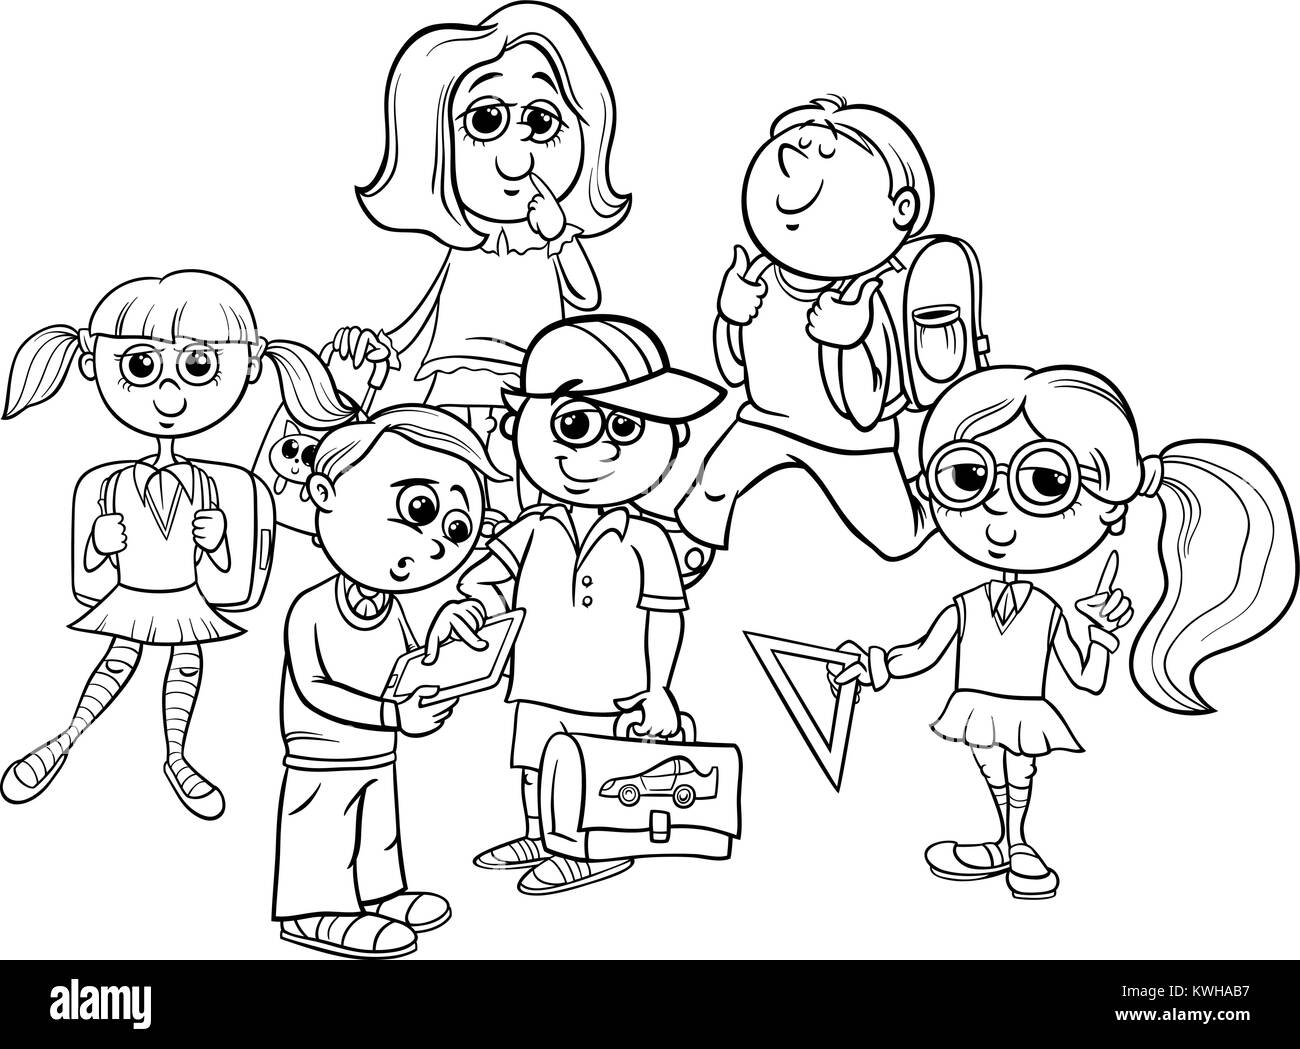 Black and White Cartoon Illustration of Elementary School Students or Pupils Characters Group Coloring Book Stock Vector